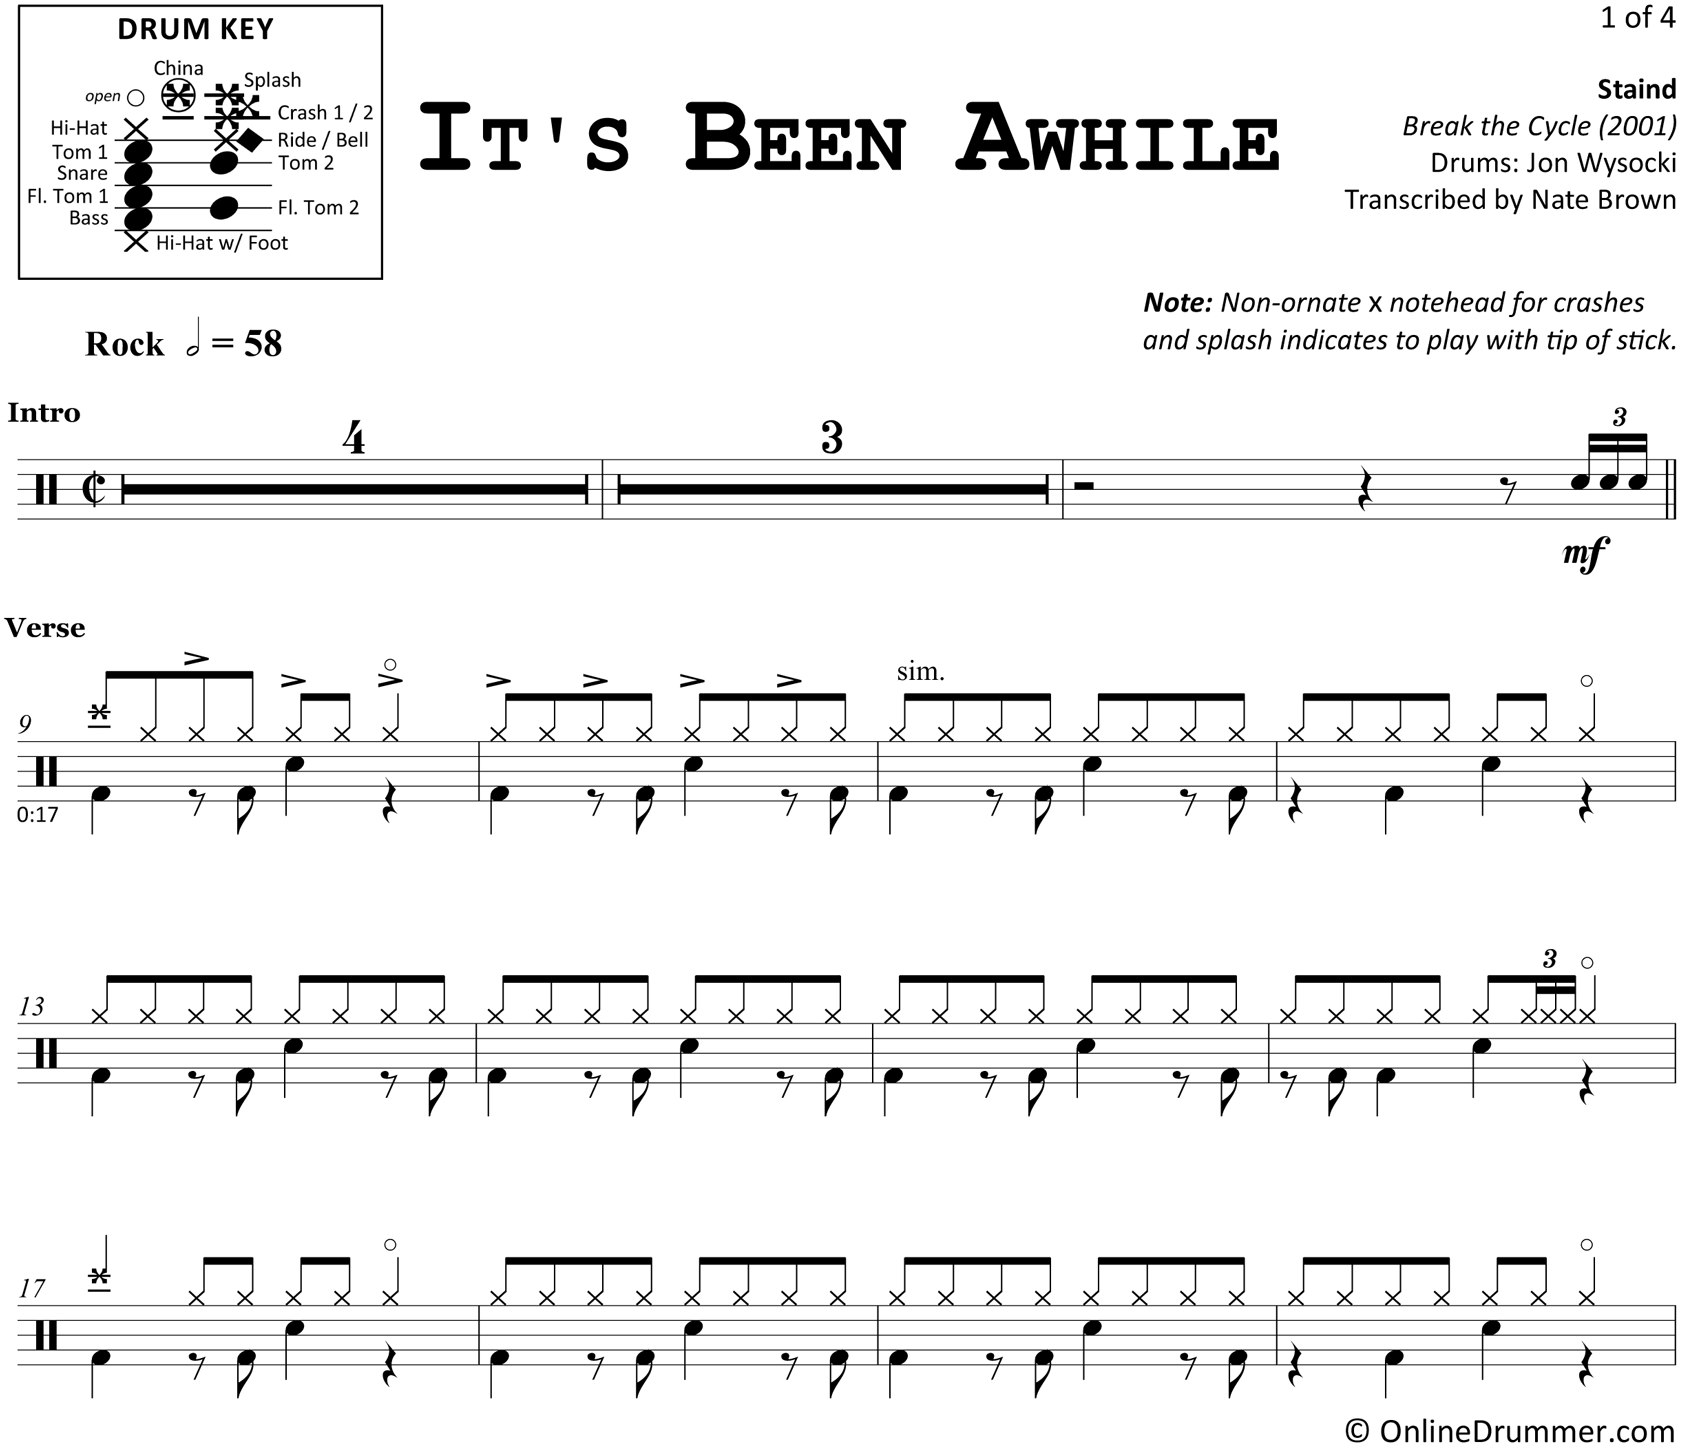 It's Been Awhile - Staind - Drum Sheet Music